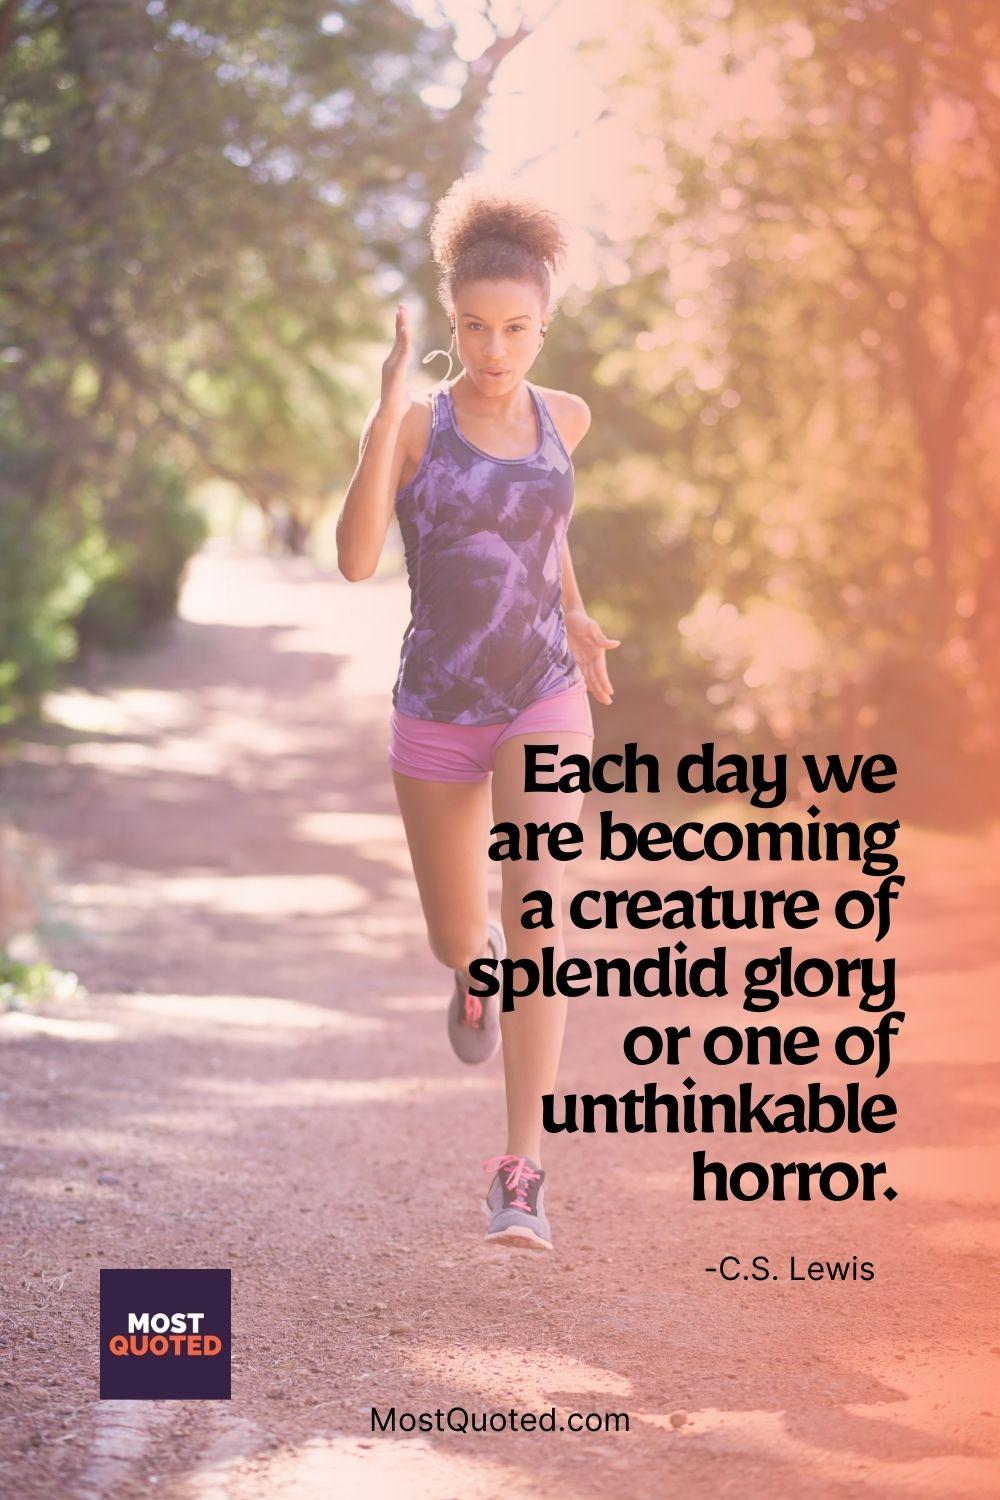 Each day we are becoming a creature of splendid glory or one of unthinkable horror. - C.S. Lewis